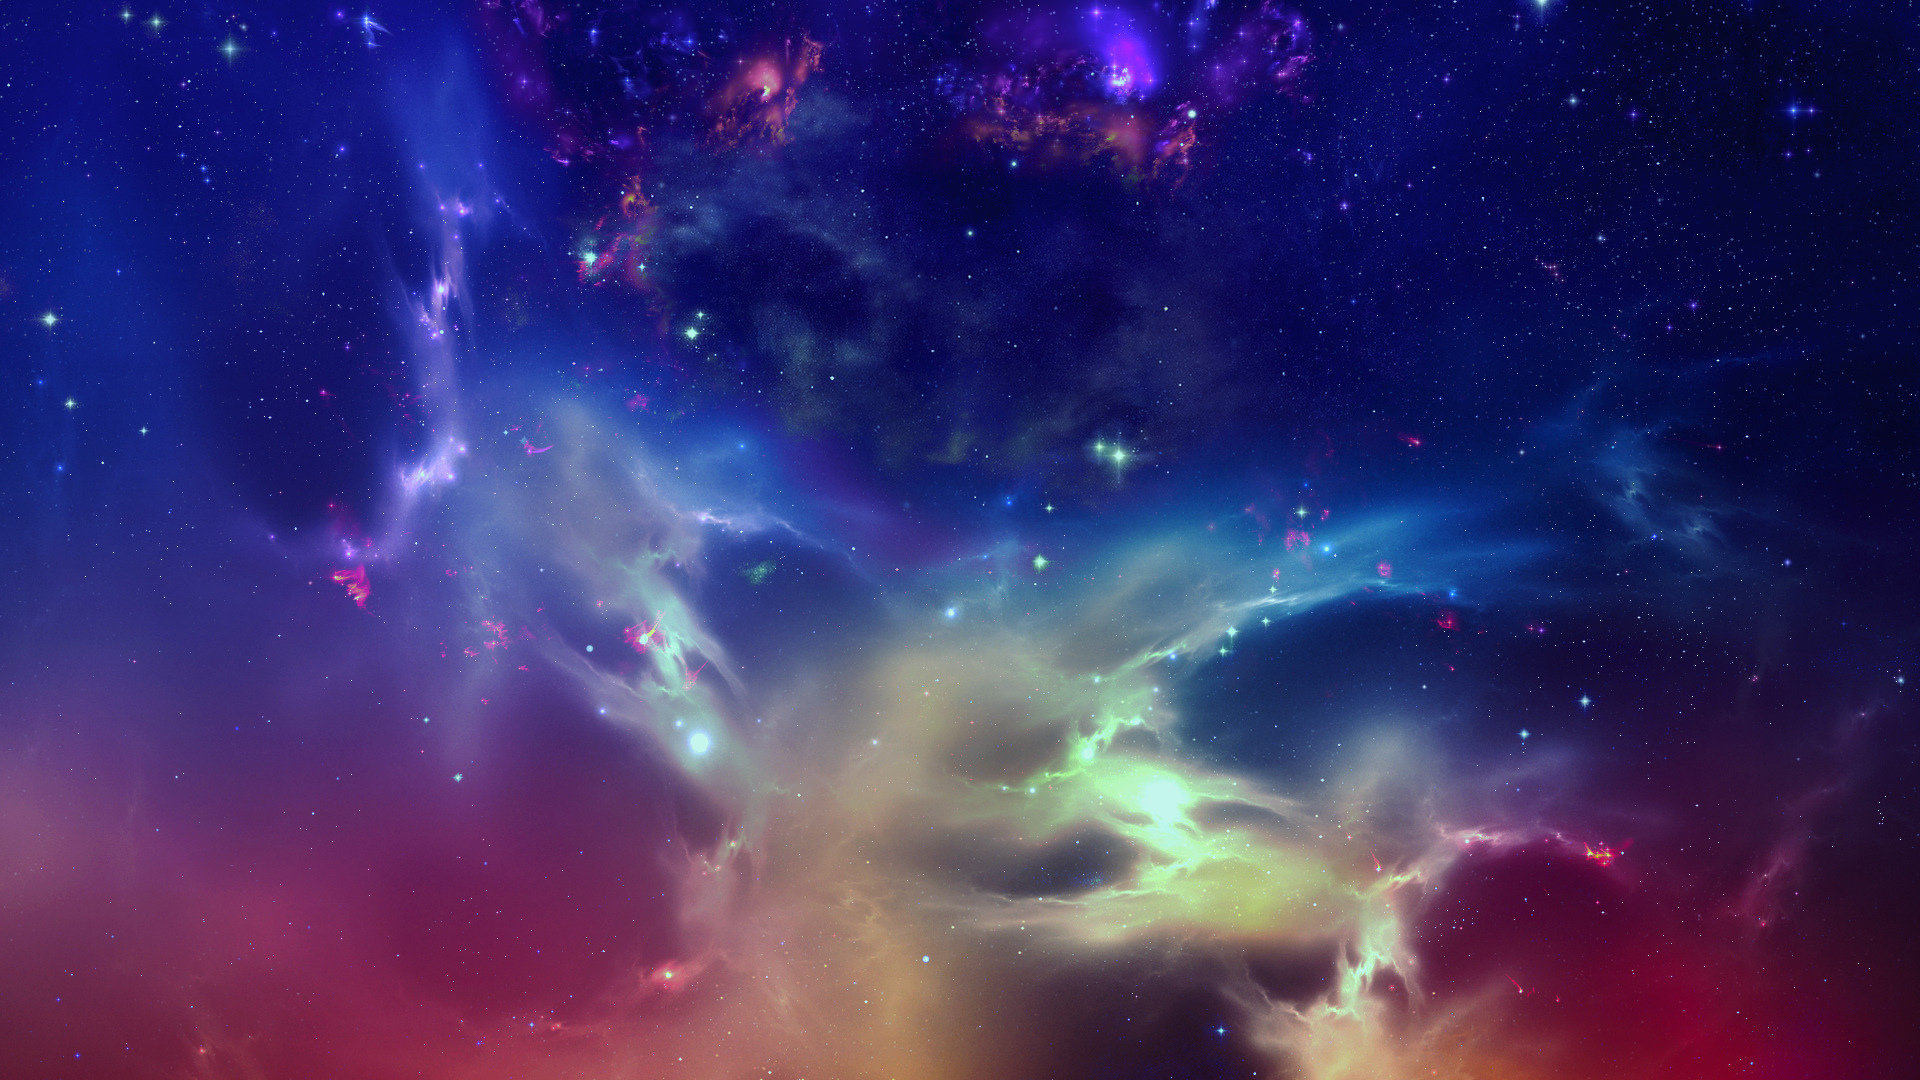 Space Wallpapers 1920x1080 Full Hd 1080p Desktop Backgrounds Perfect screen background display for desktop, iphone, pc, laptop, computer, android phone, smartphone, imac, macbook, tablet, mobile device. hd 1080p desktop backgrounds